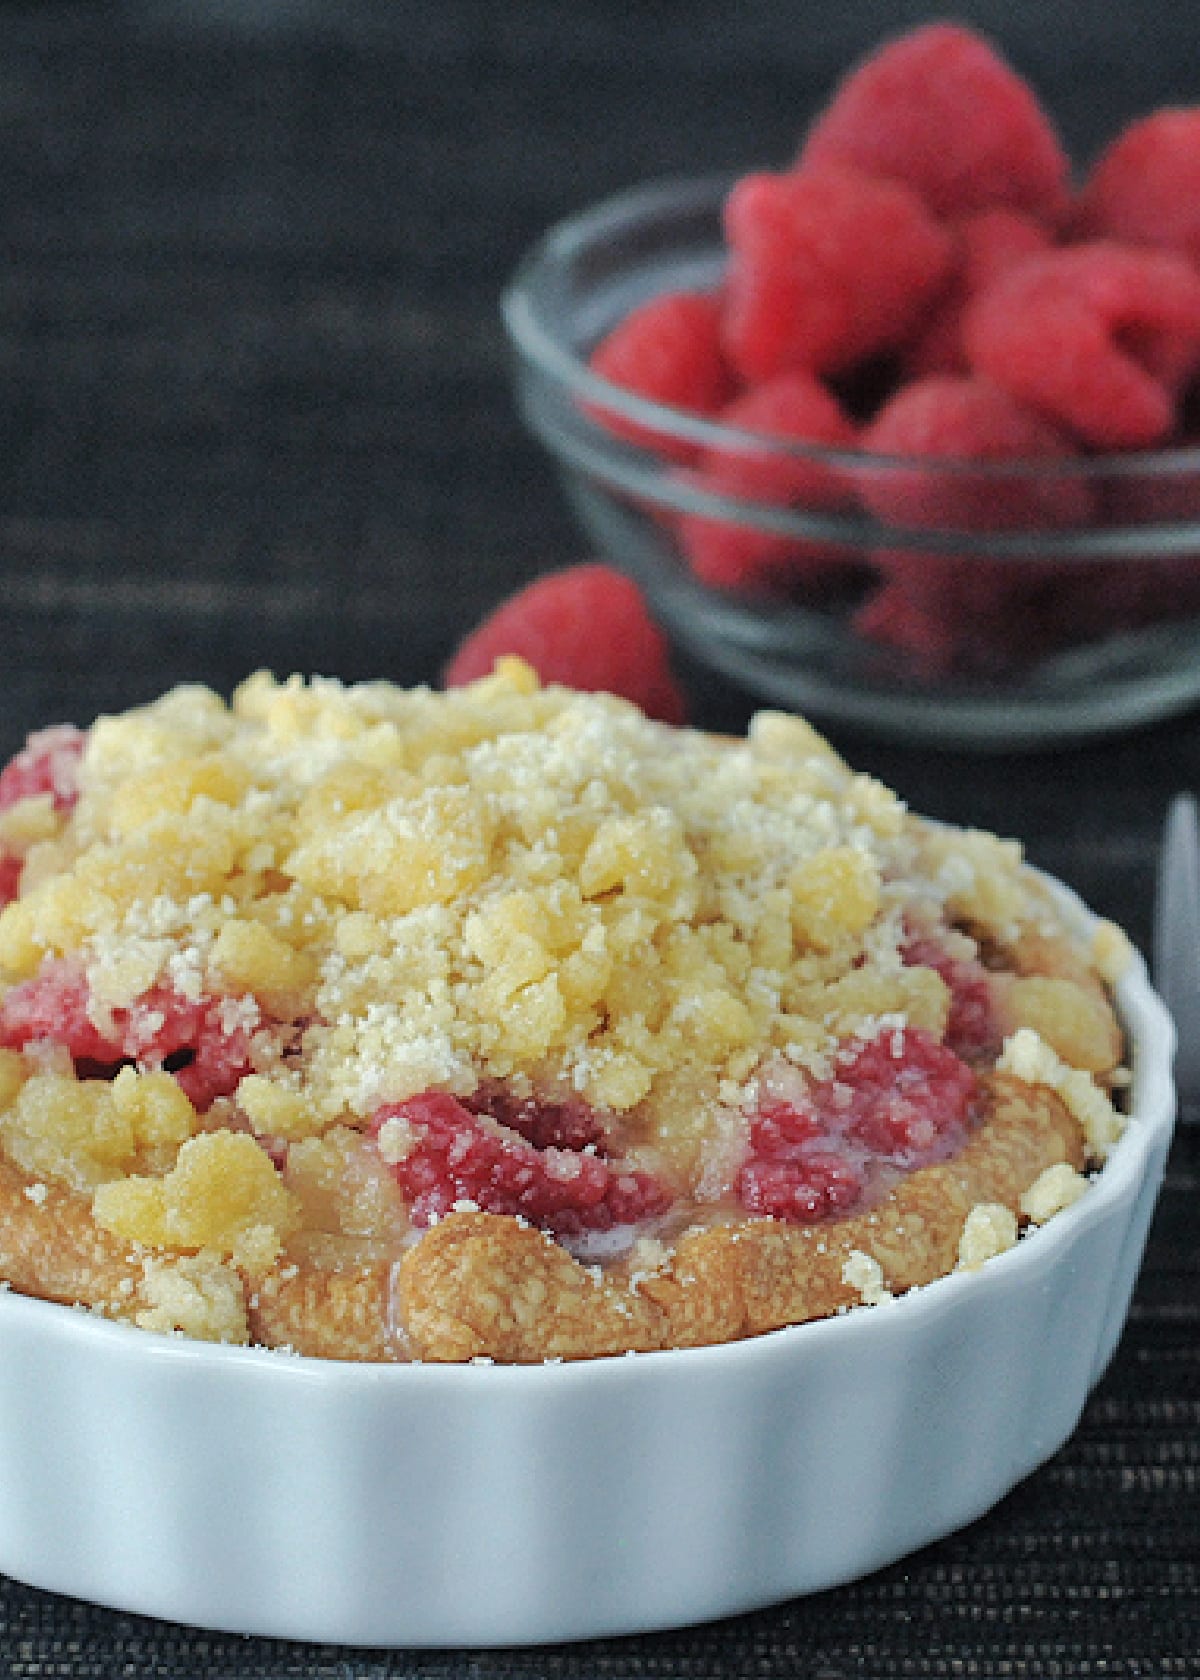 Raspberry crumble pie in a small white ramekin, with a small glass bowl of fresh raspberries in background.